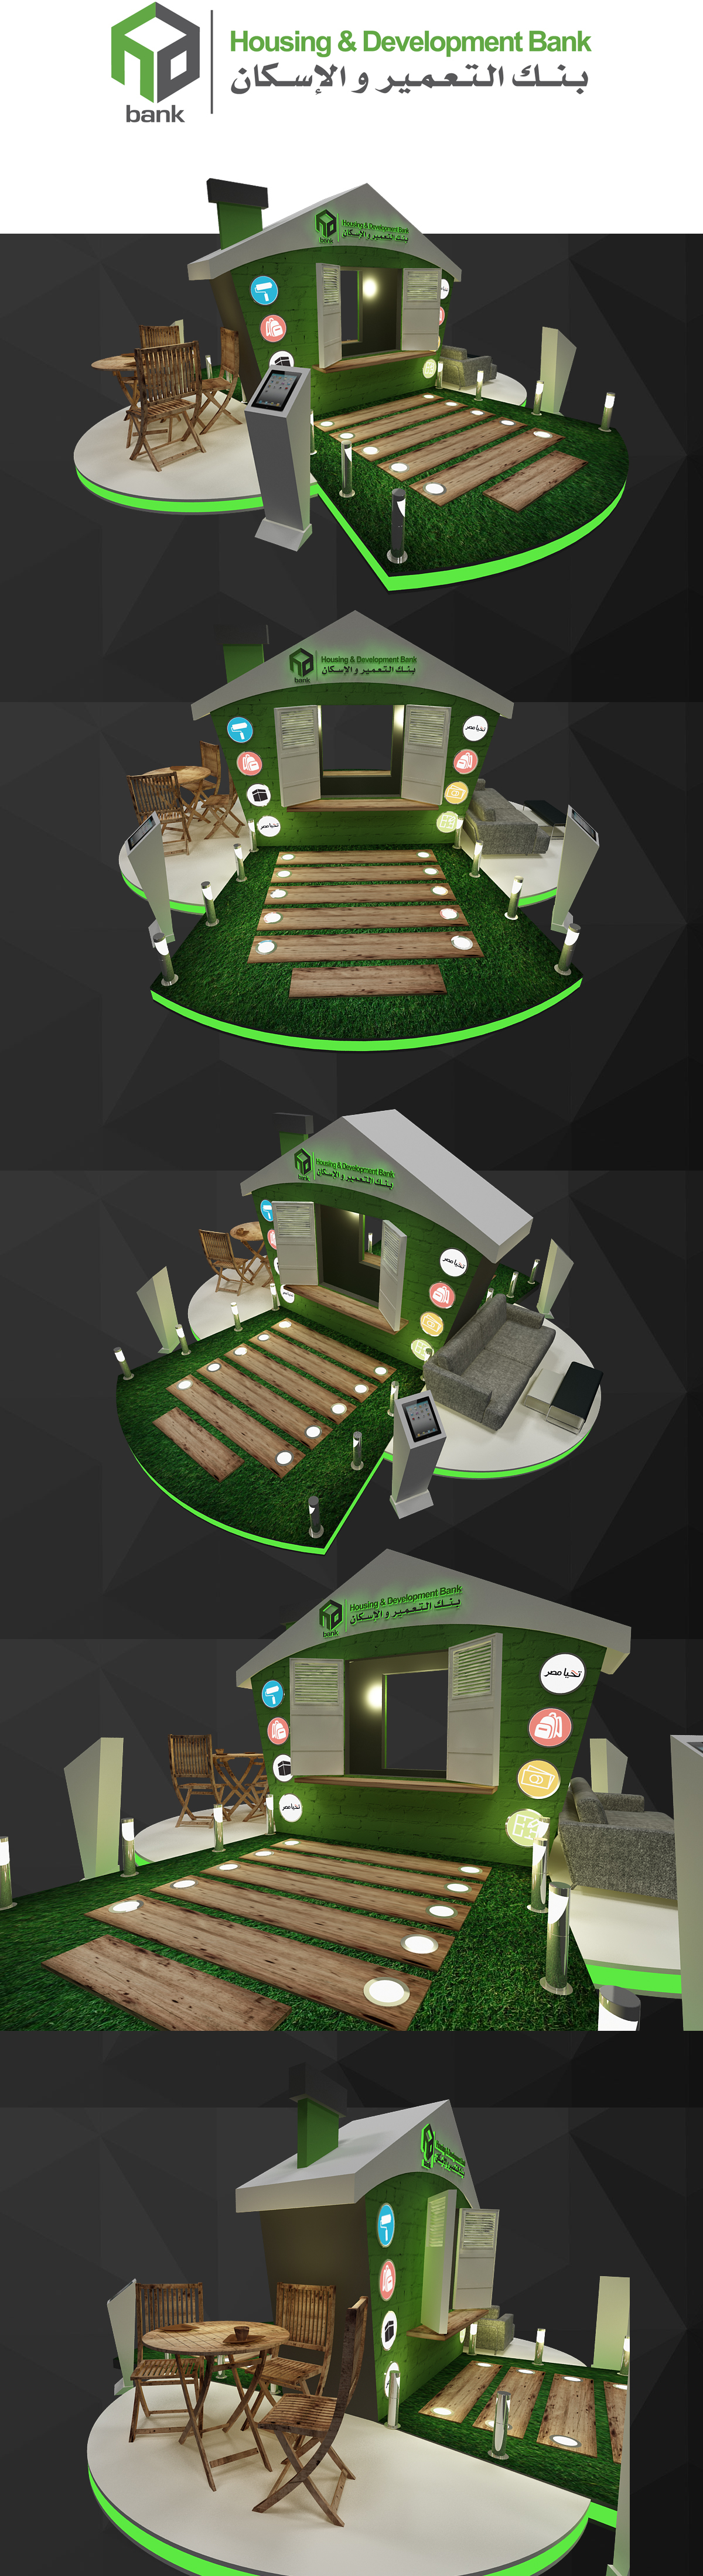 activation booth Stand gondola design exhbo exhbition Interior Packaging